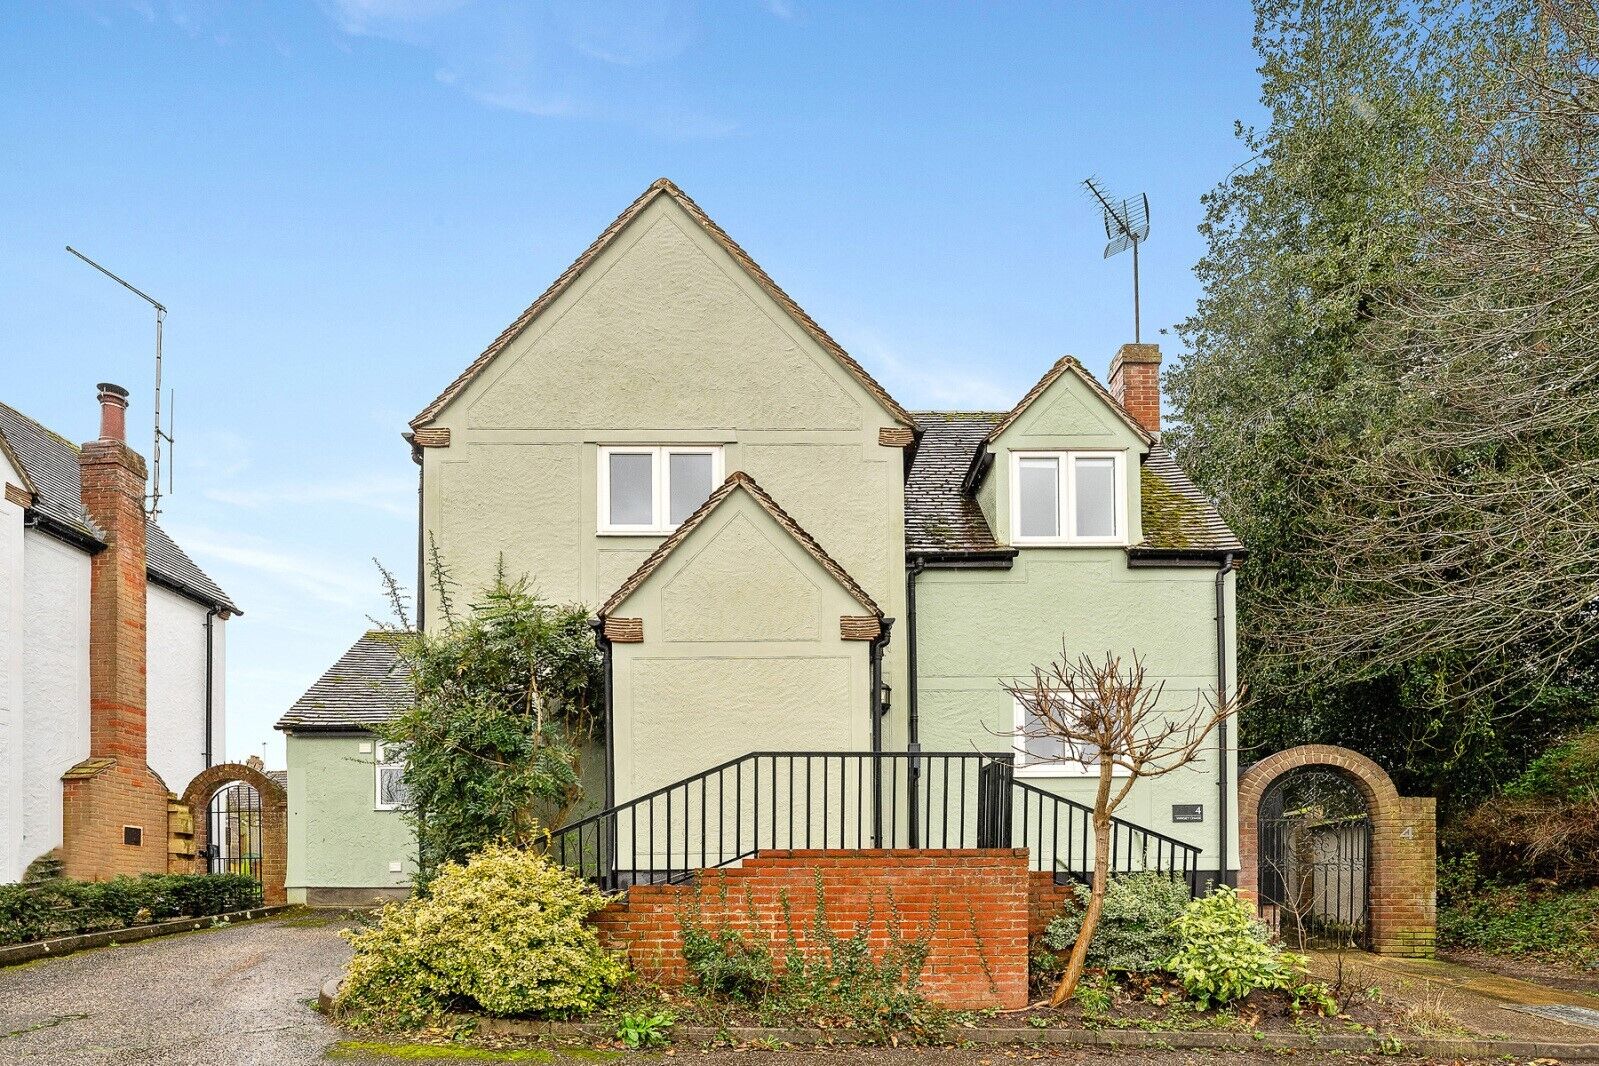 3 bedroom detached house for sale Winsey Chase, Finchingfield, CM7, main image